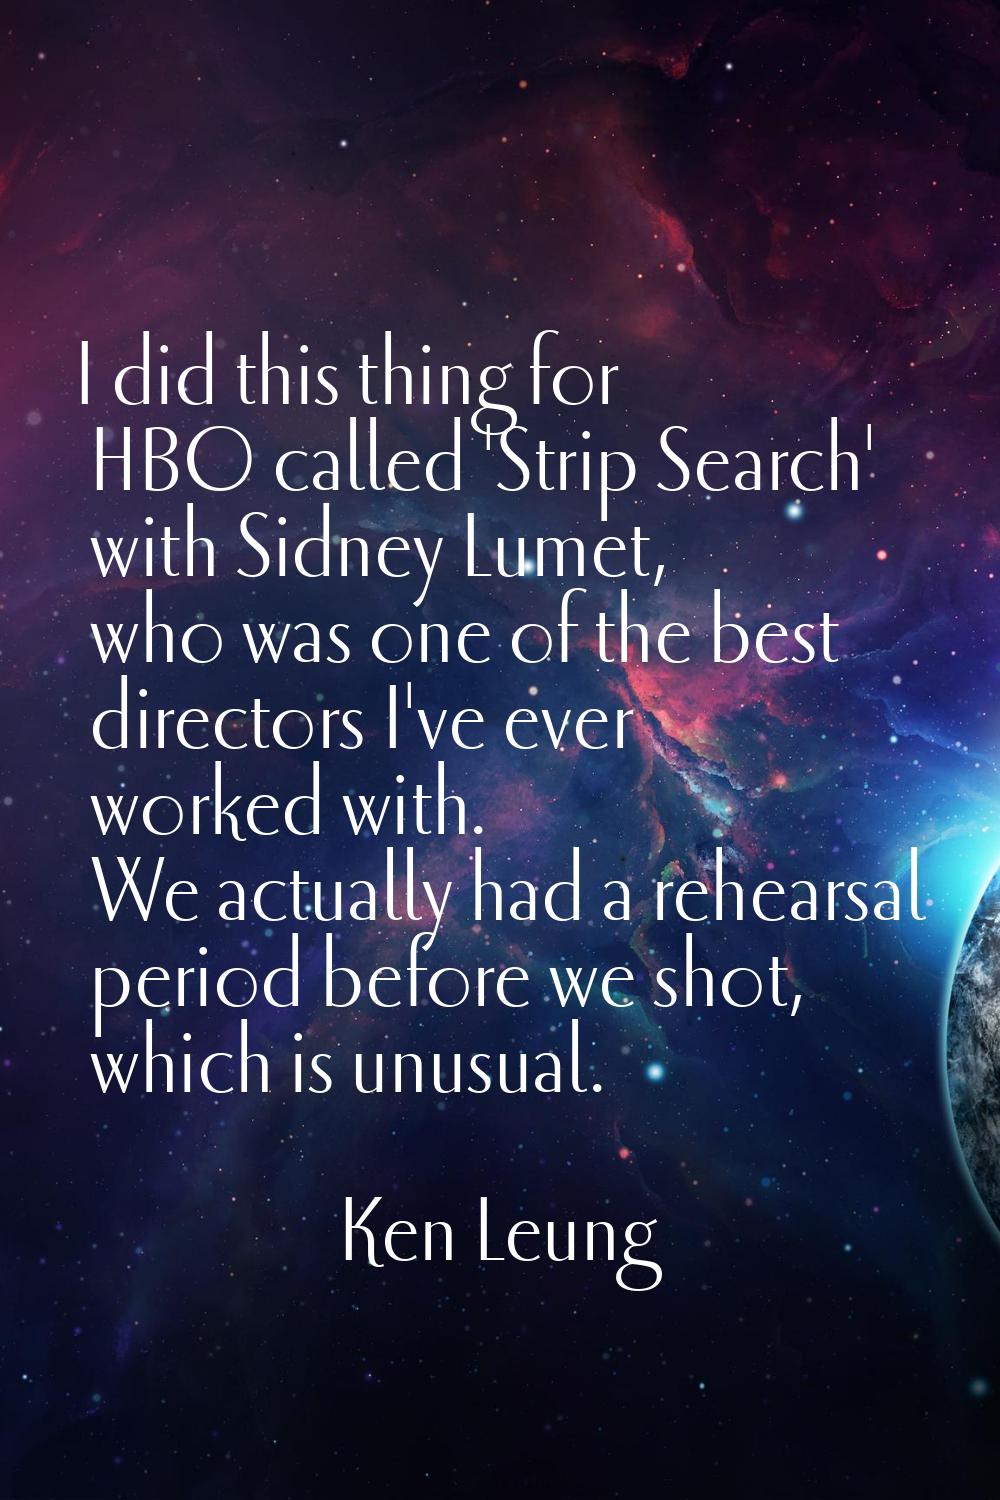 I did this thing for HBO called 'Strip Search' with Sidney Lumet, who was one of the best directors